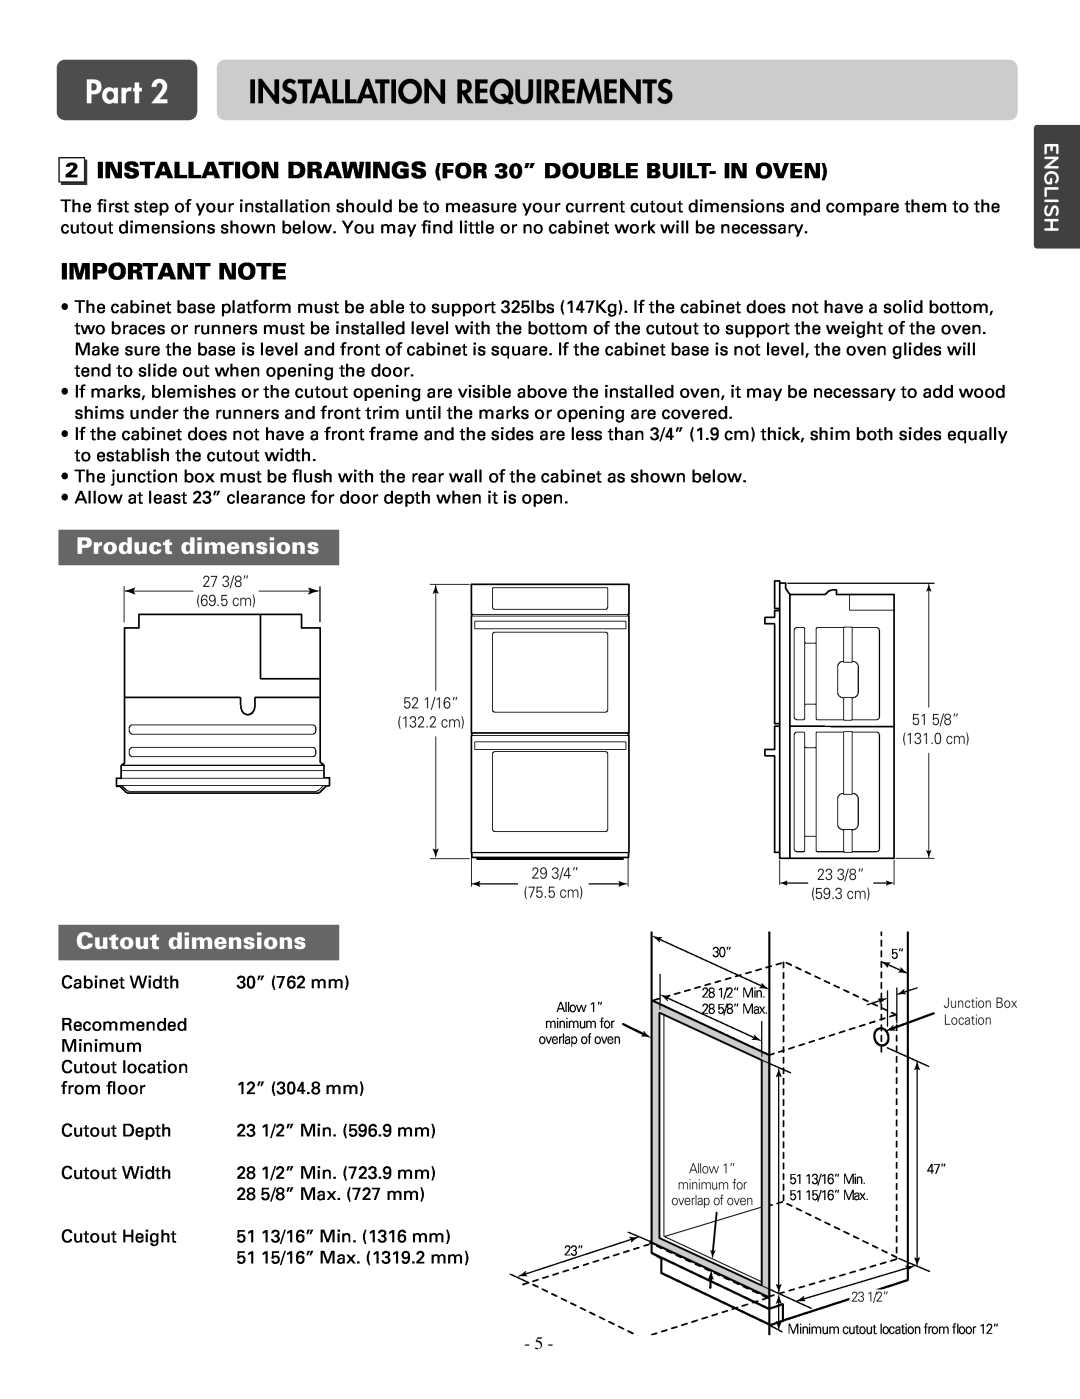 LG Electronics LSWD305ST Part 2 INSTALLATION REQUIREMENTS, Important Note, Product dimensions, Cutout dimensions, English 